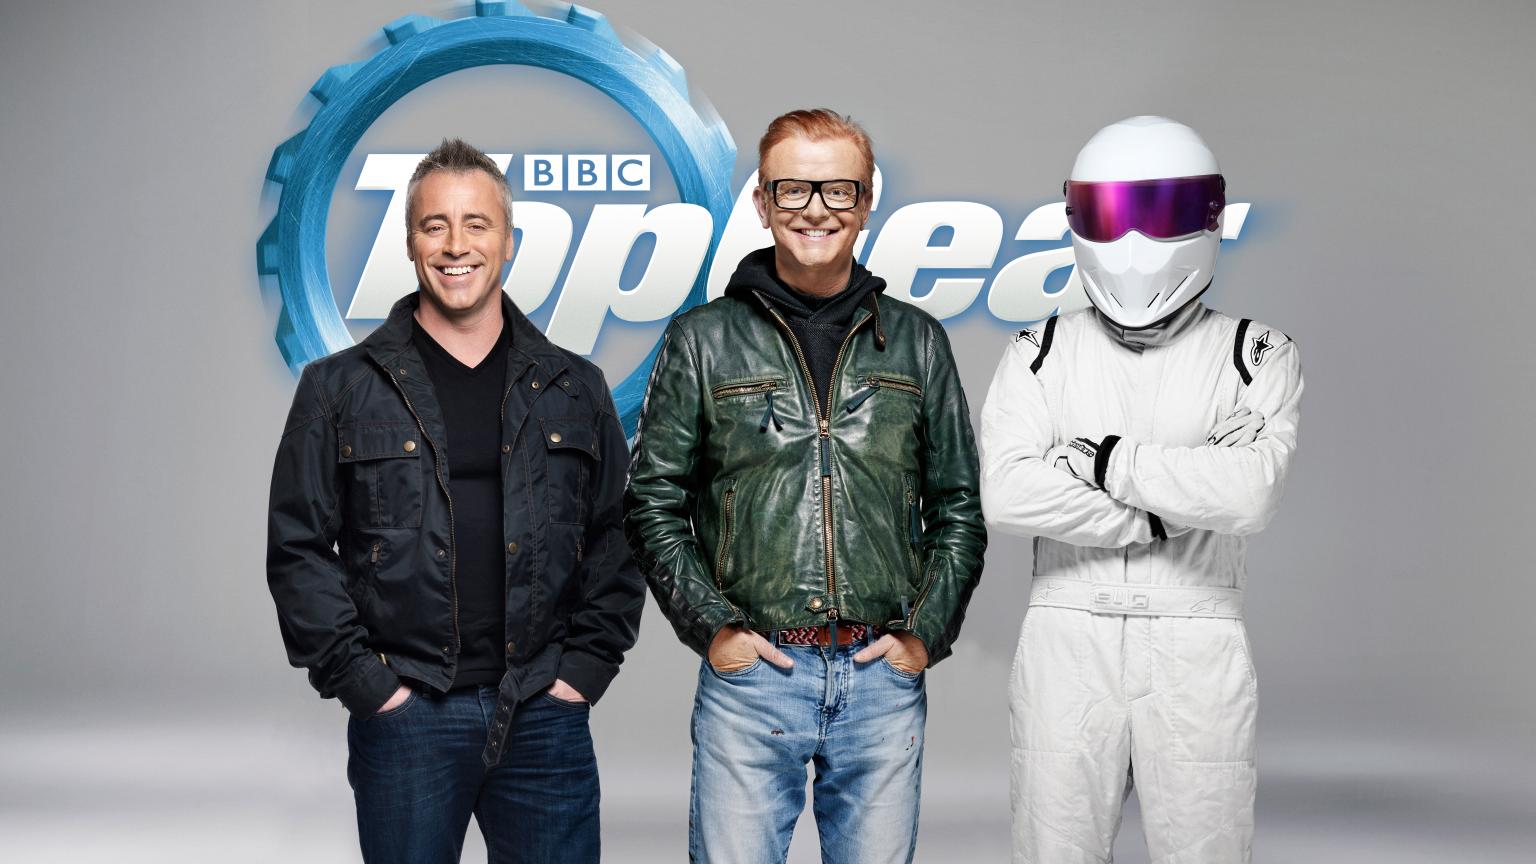 Top Crew Fill In Chris Evans' Spot, No New Presenters Planned - autoevolution